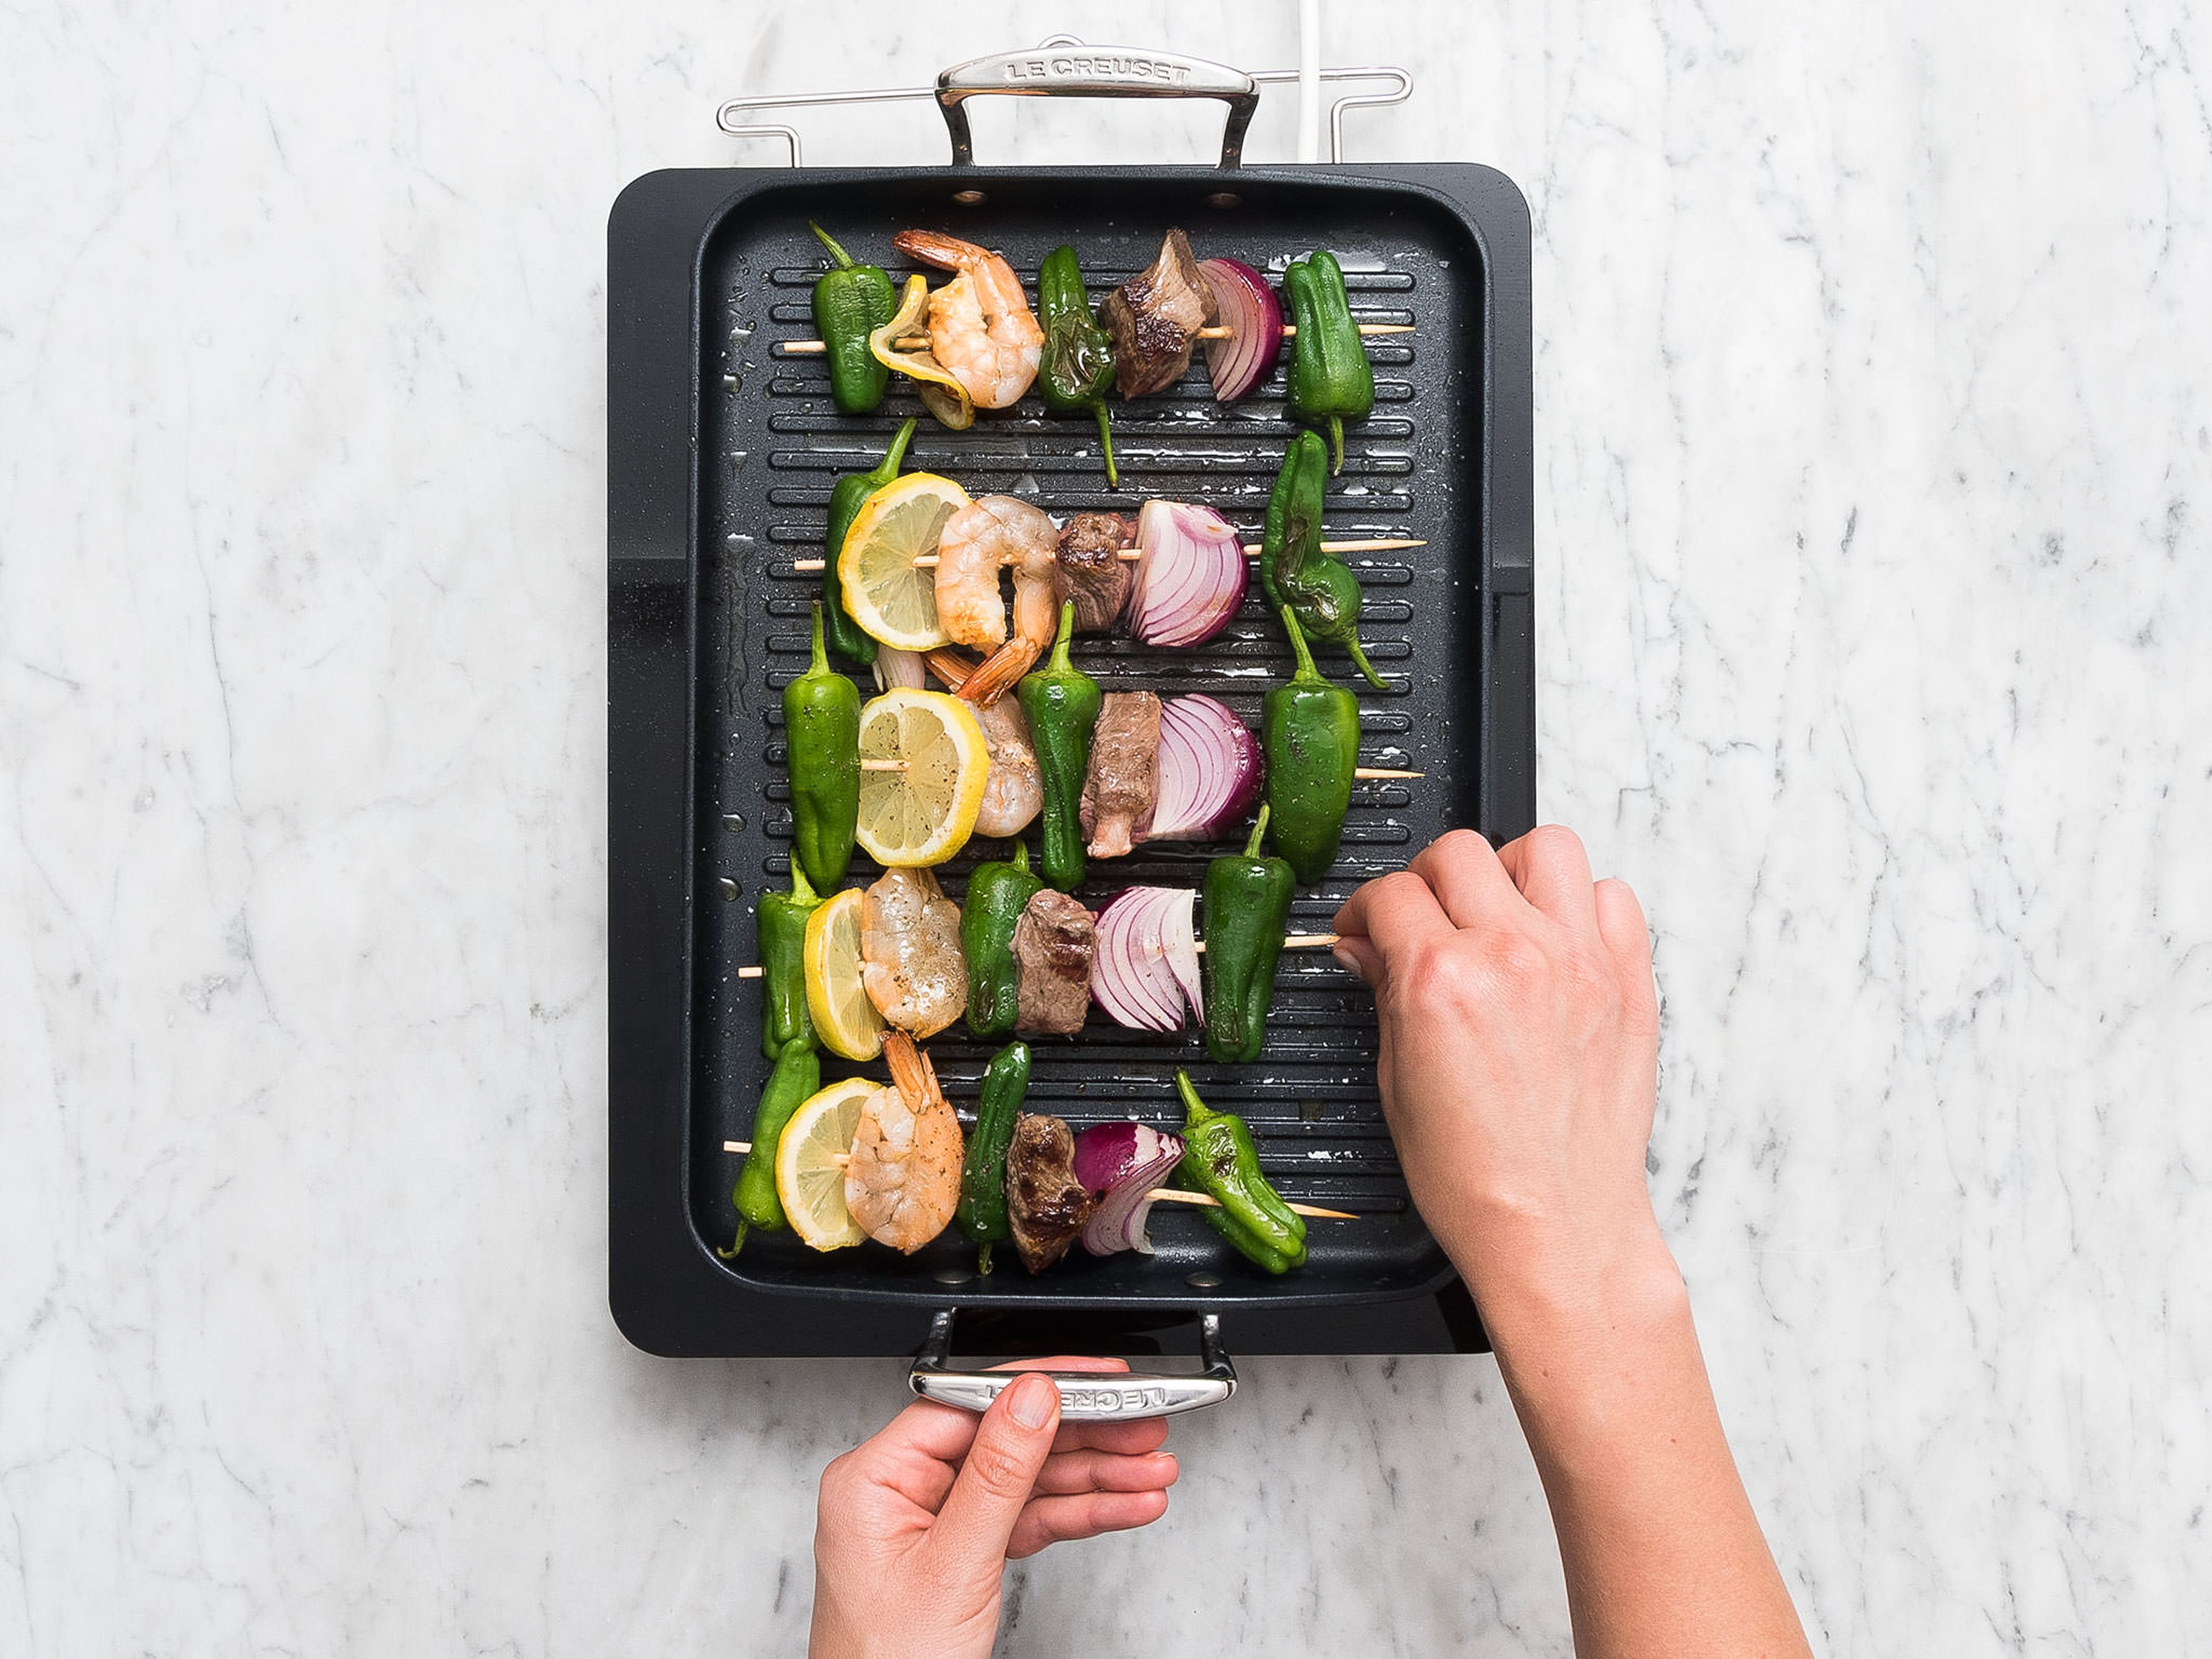 Heat olive oil in a large pan over medium-high heat, add skewers, and sear for approx. 2 – 3 min. Reduce heat and fry for approx. 2 - 3 min. more. Season with salt and pepper to taste. Serve with homemade dip. Enjoy!